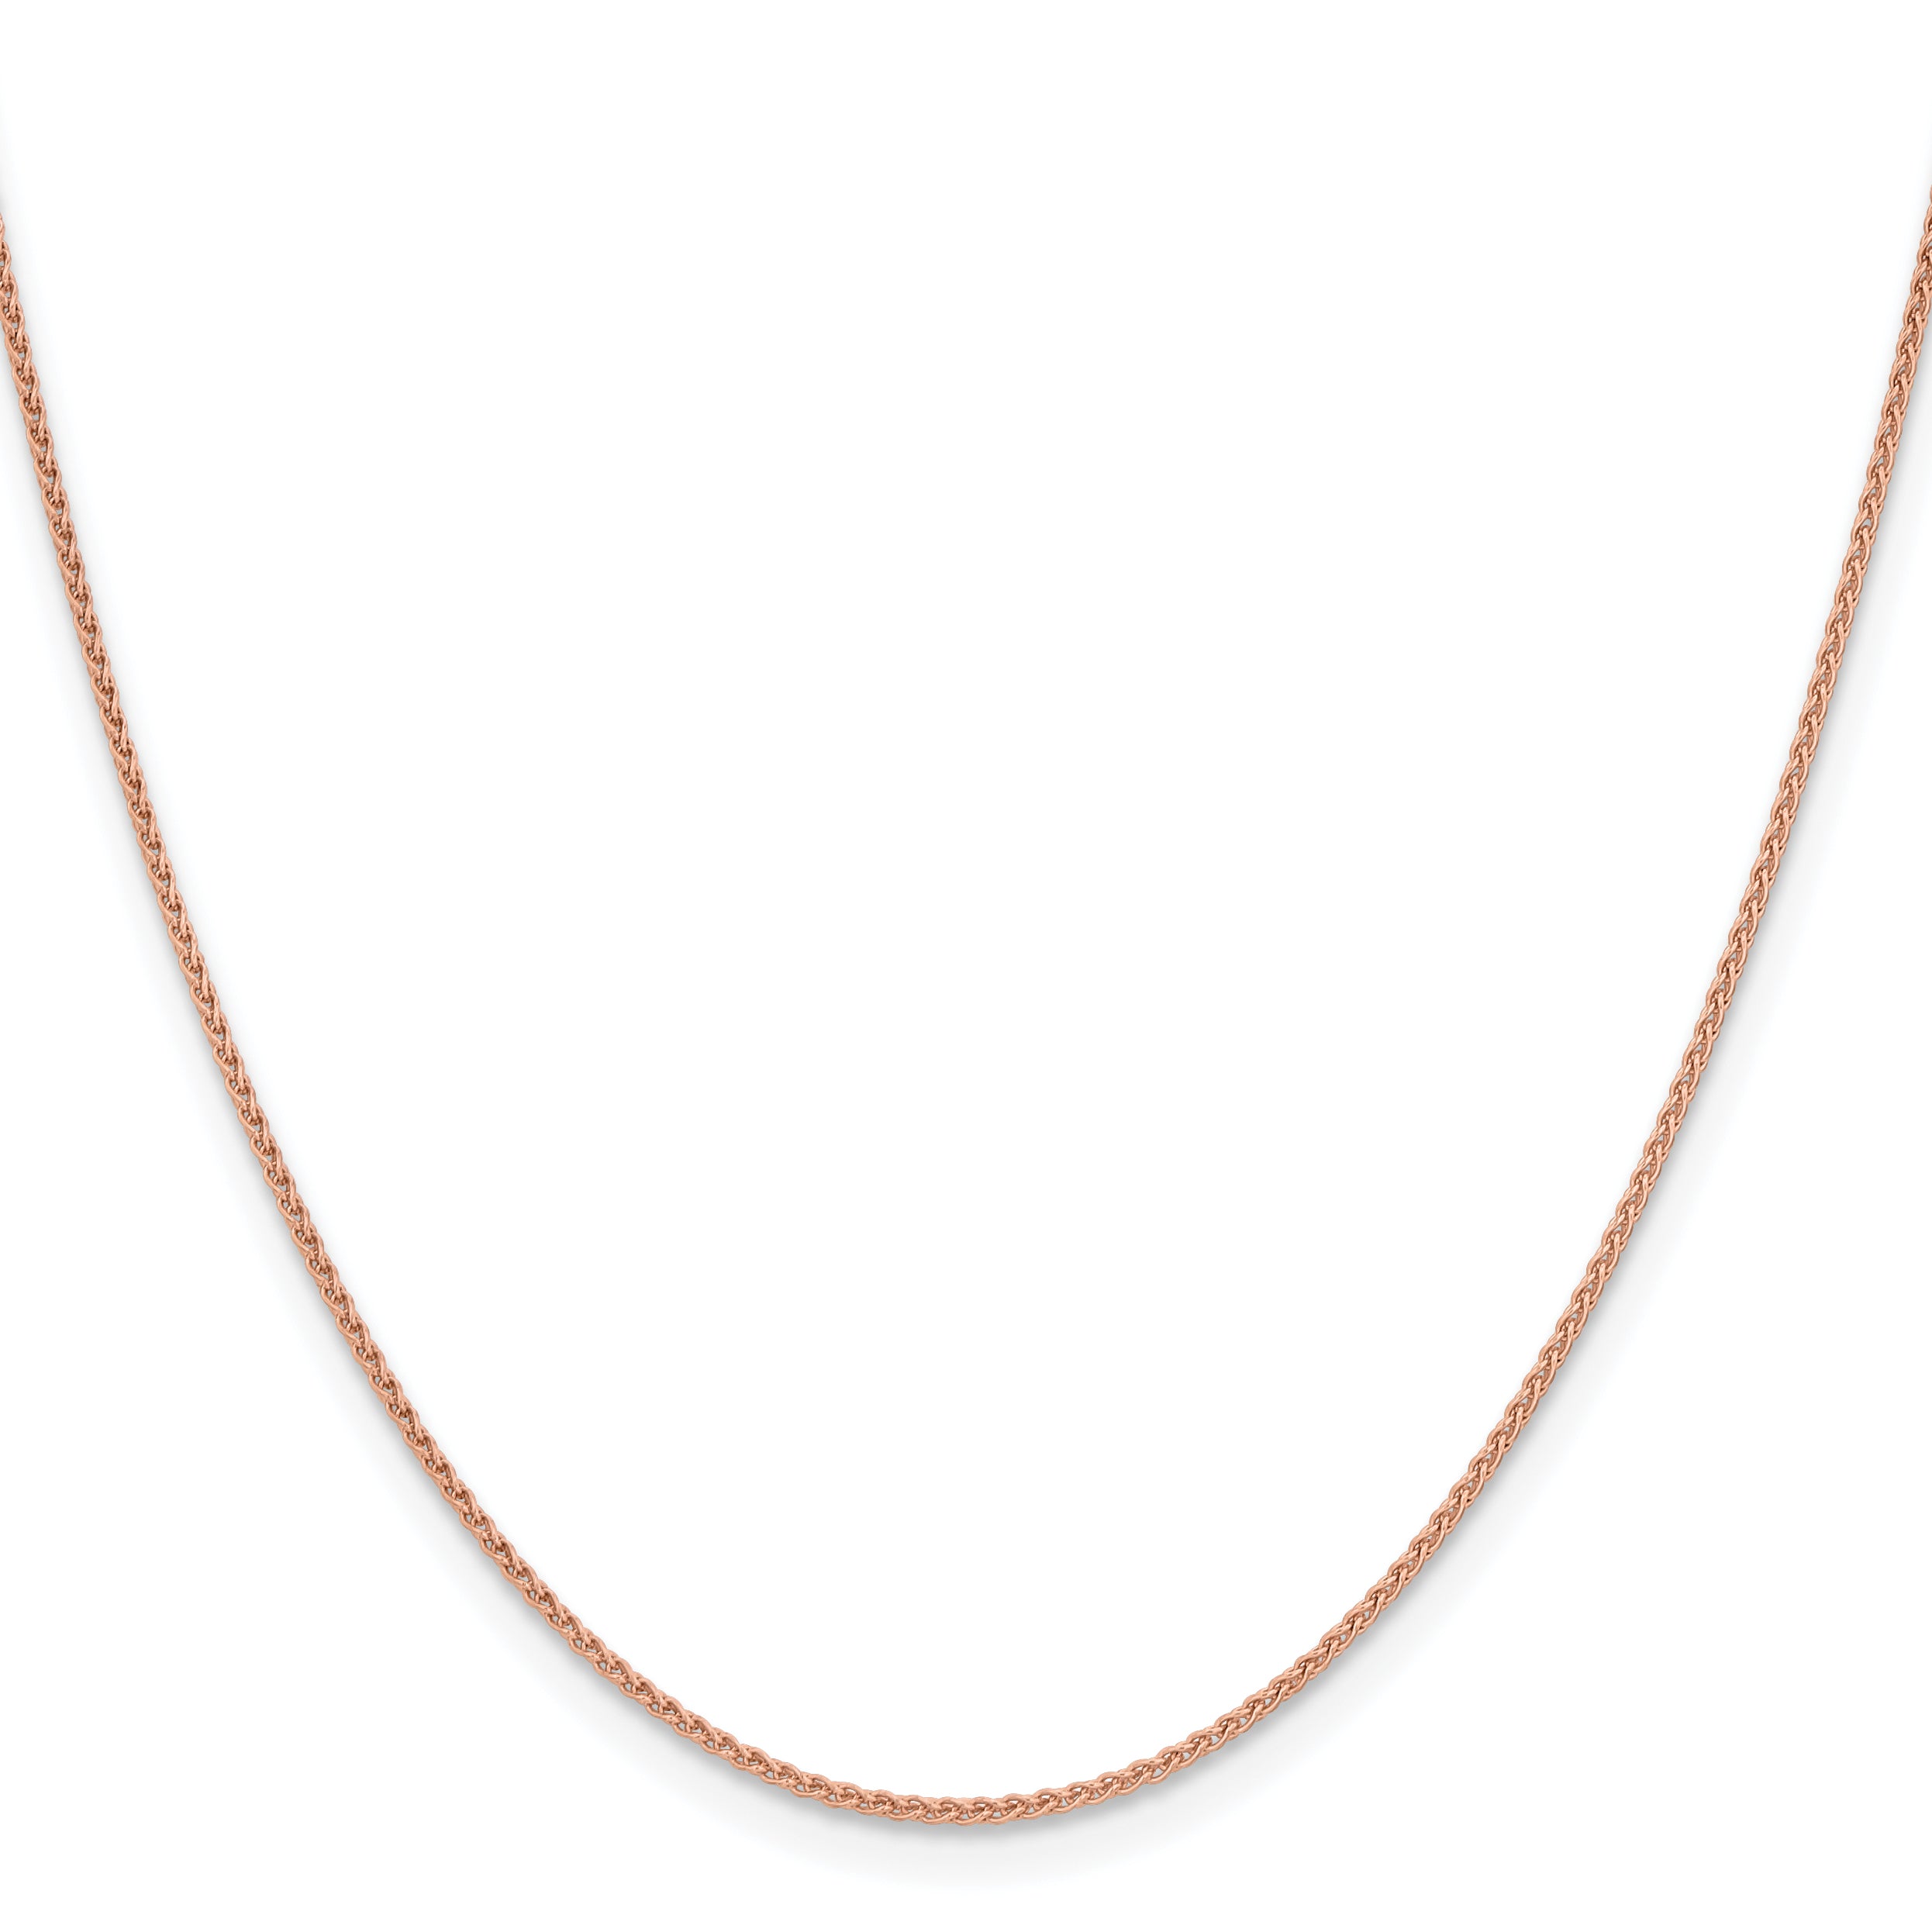 14K Rose Gold 16 inch 1.25mm Solid Polished Spiga with Lobster Clasp Chain